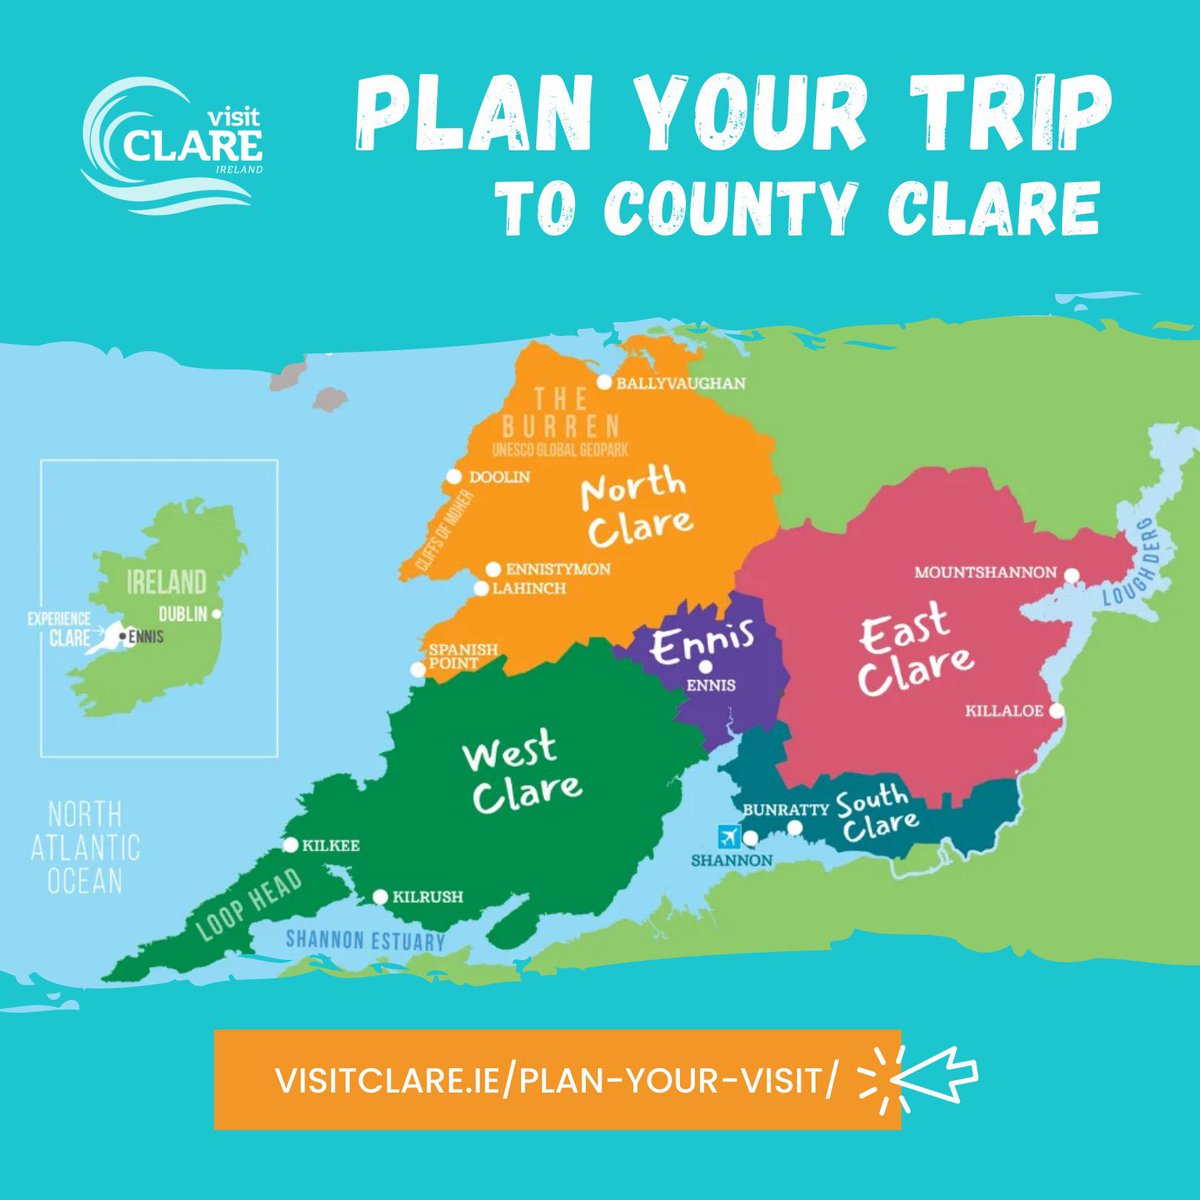 Have you planned your next trip to County Clare? 💛💙 In an area less than 2-hours drive from end-to-end, it offers so much scope for enjoyment and fun. Go to visitclare.ie/plan-your-visi… for general advice and tips to help you plan your visit. We look forward to welcoming you!